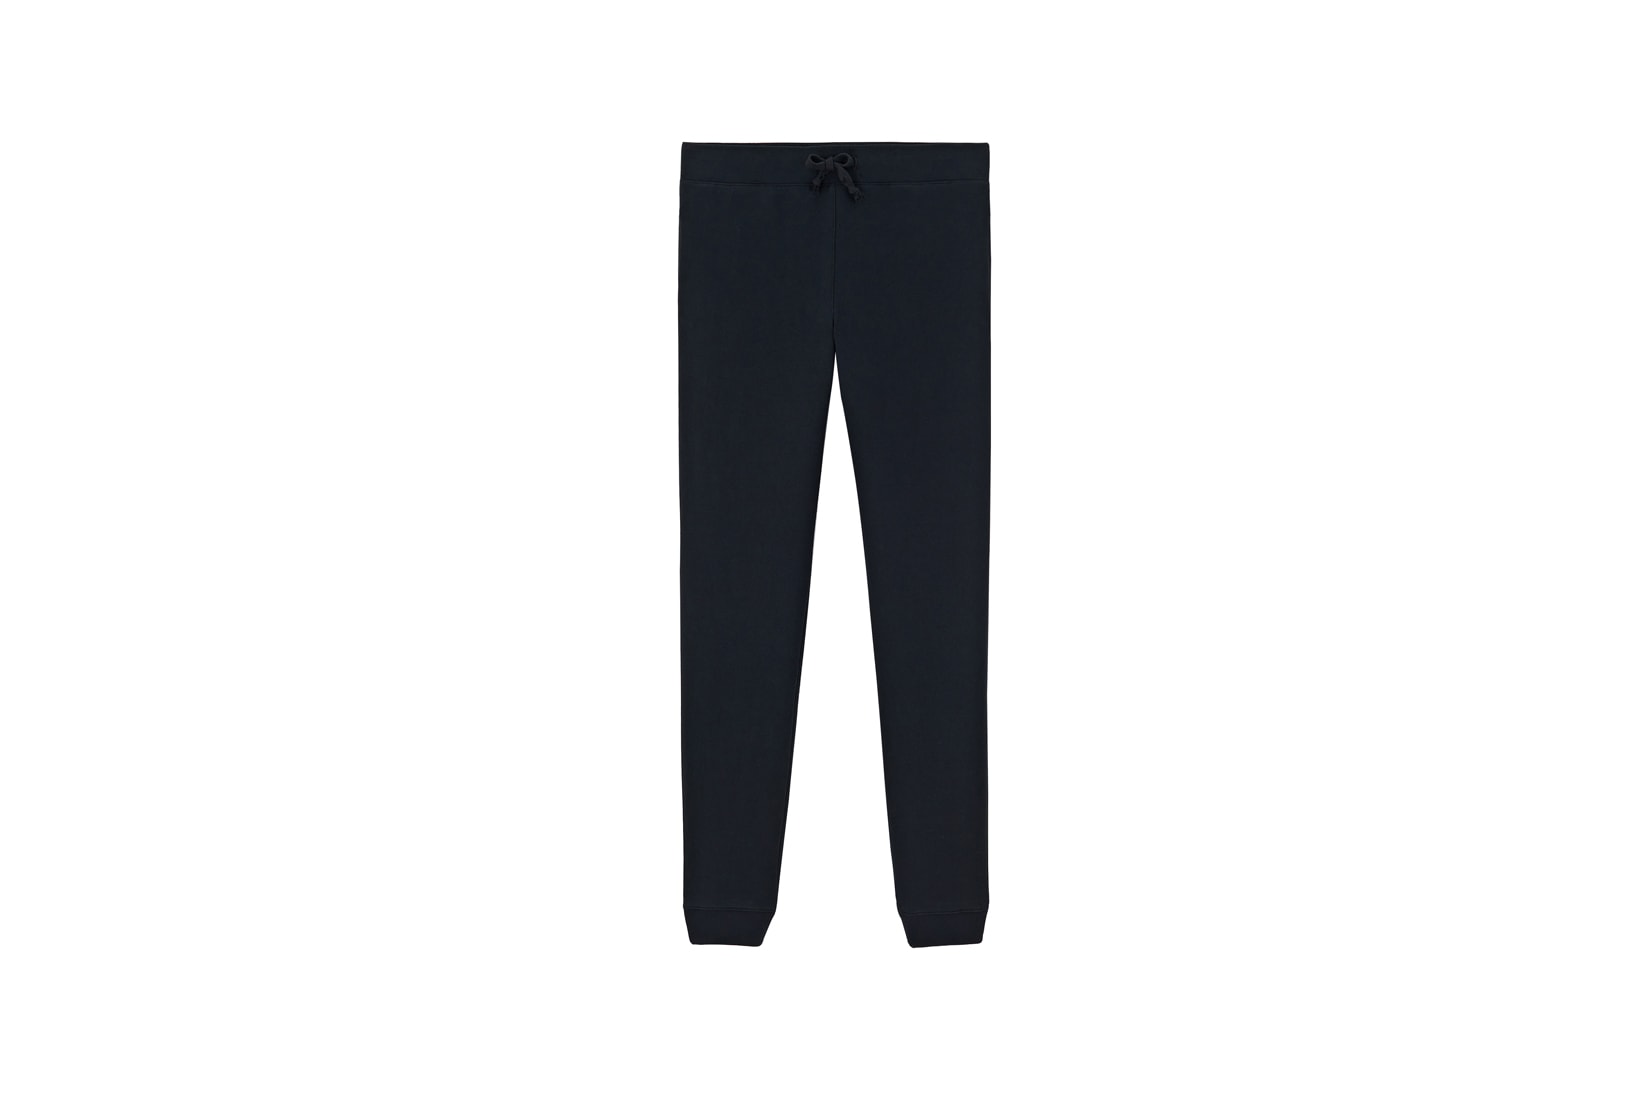 A.P.C. Fall/Winter 2018 Collection Sweatpants Black